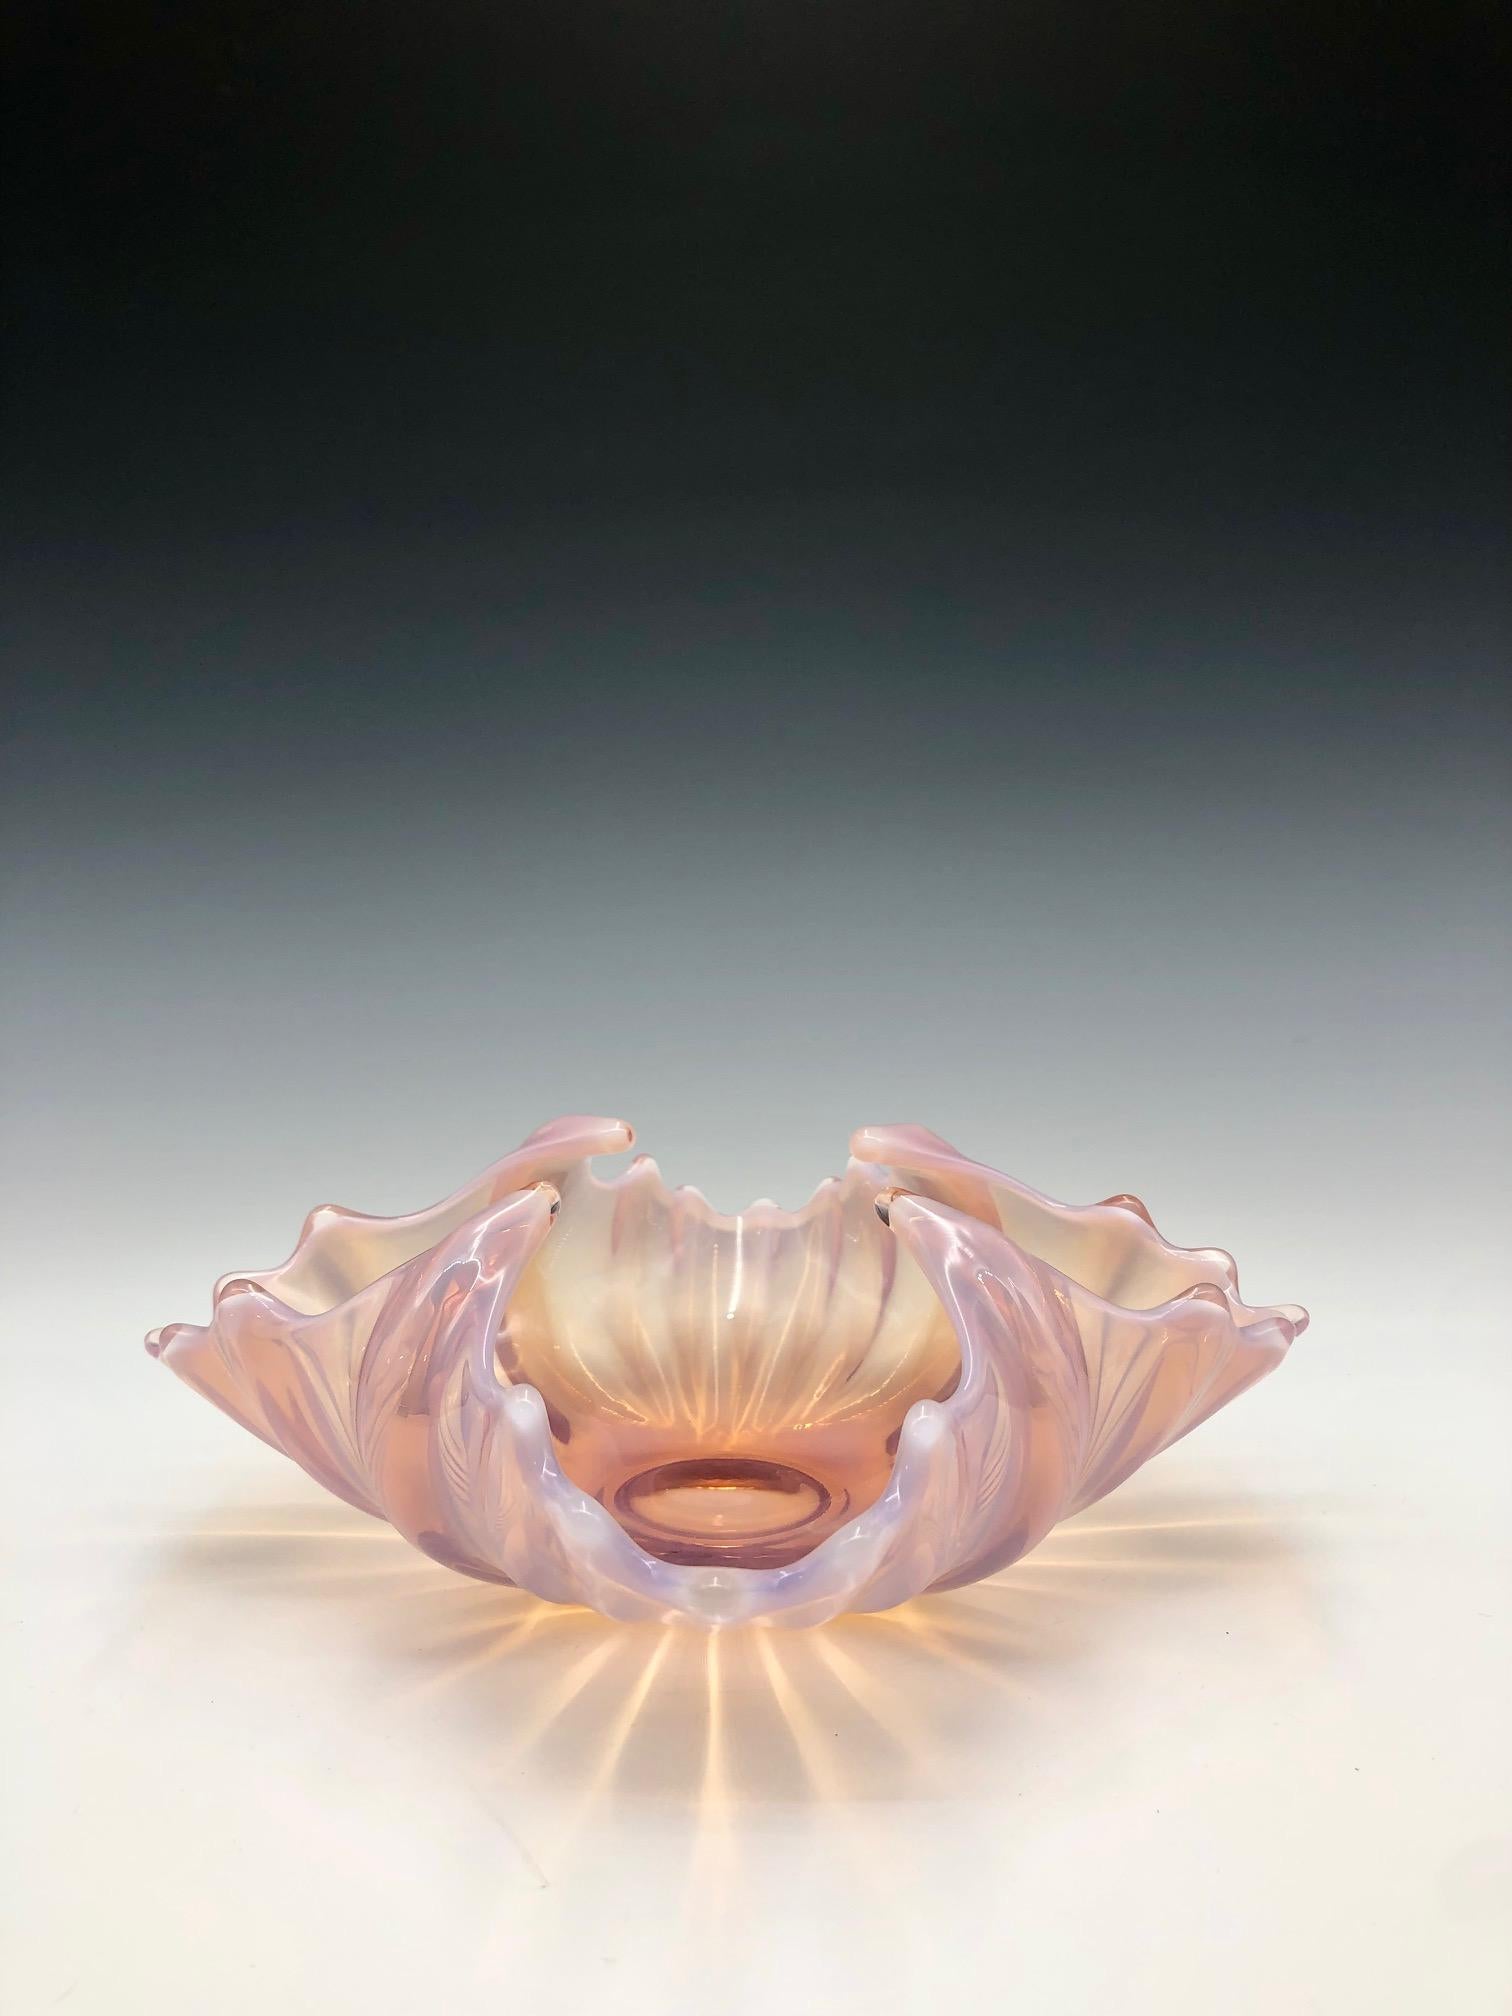 Elegant vintage 1950s pale pink opalescent Heirloom square ribbed candy dish bowl with curved corners by Fostoria Glass Company.   

Size: 3